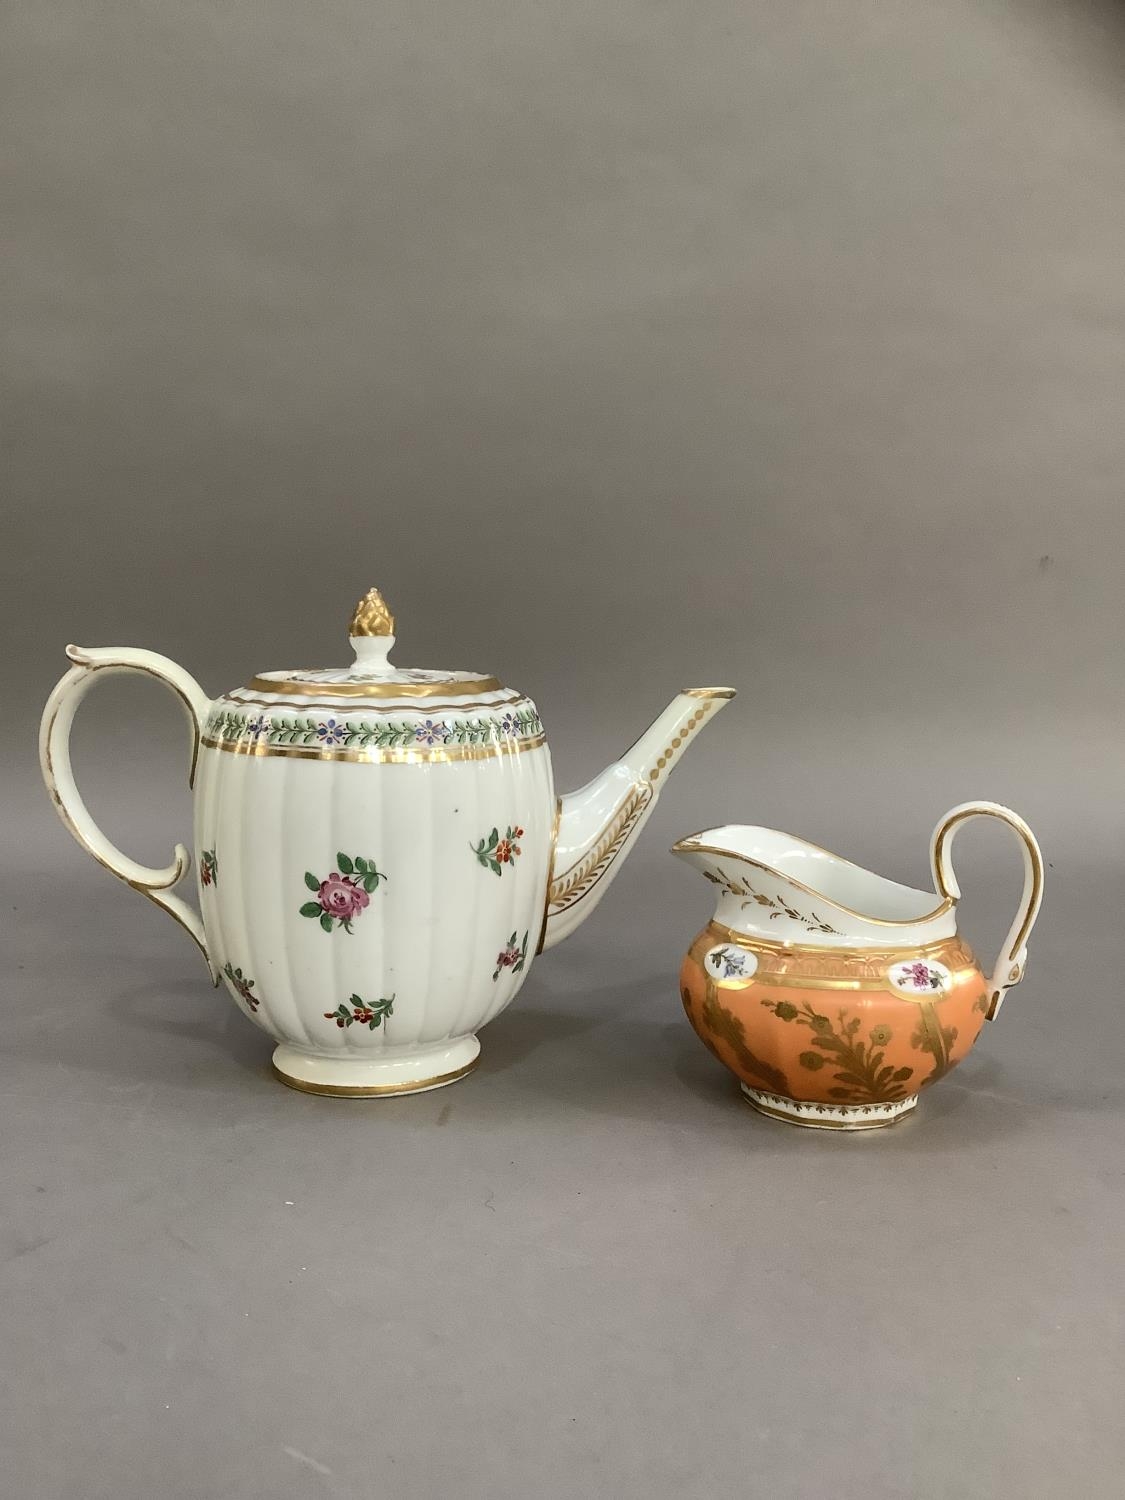 An 18th century teapot, the lid having an acorn gilt finial, the fluted body of barrel shape painted - Image 3 of 9